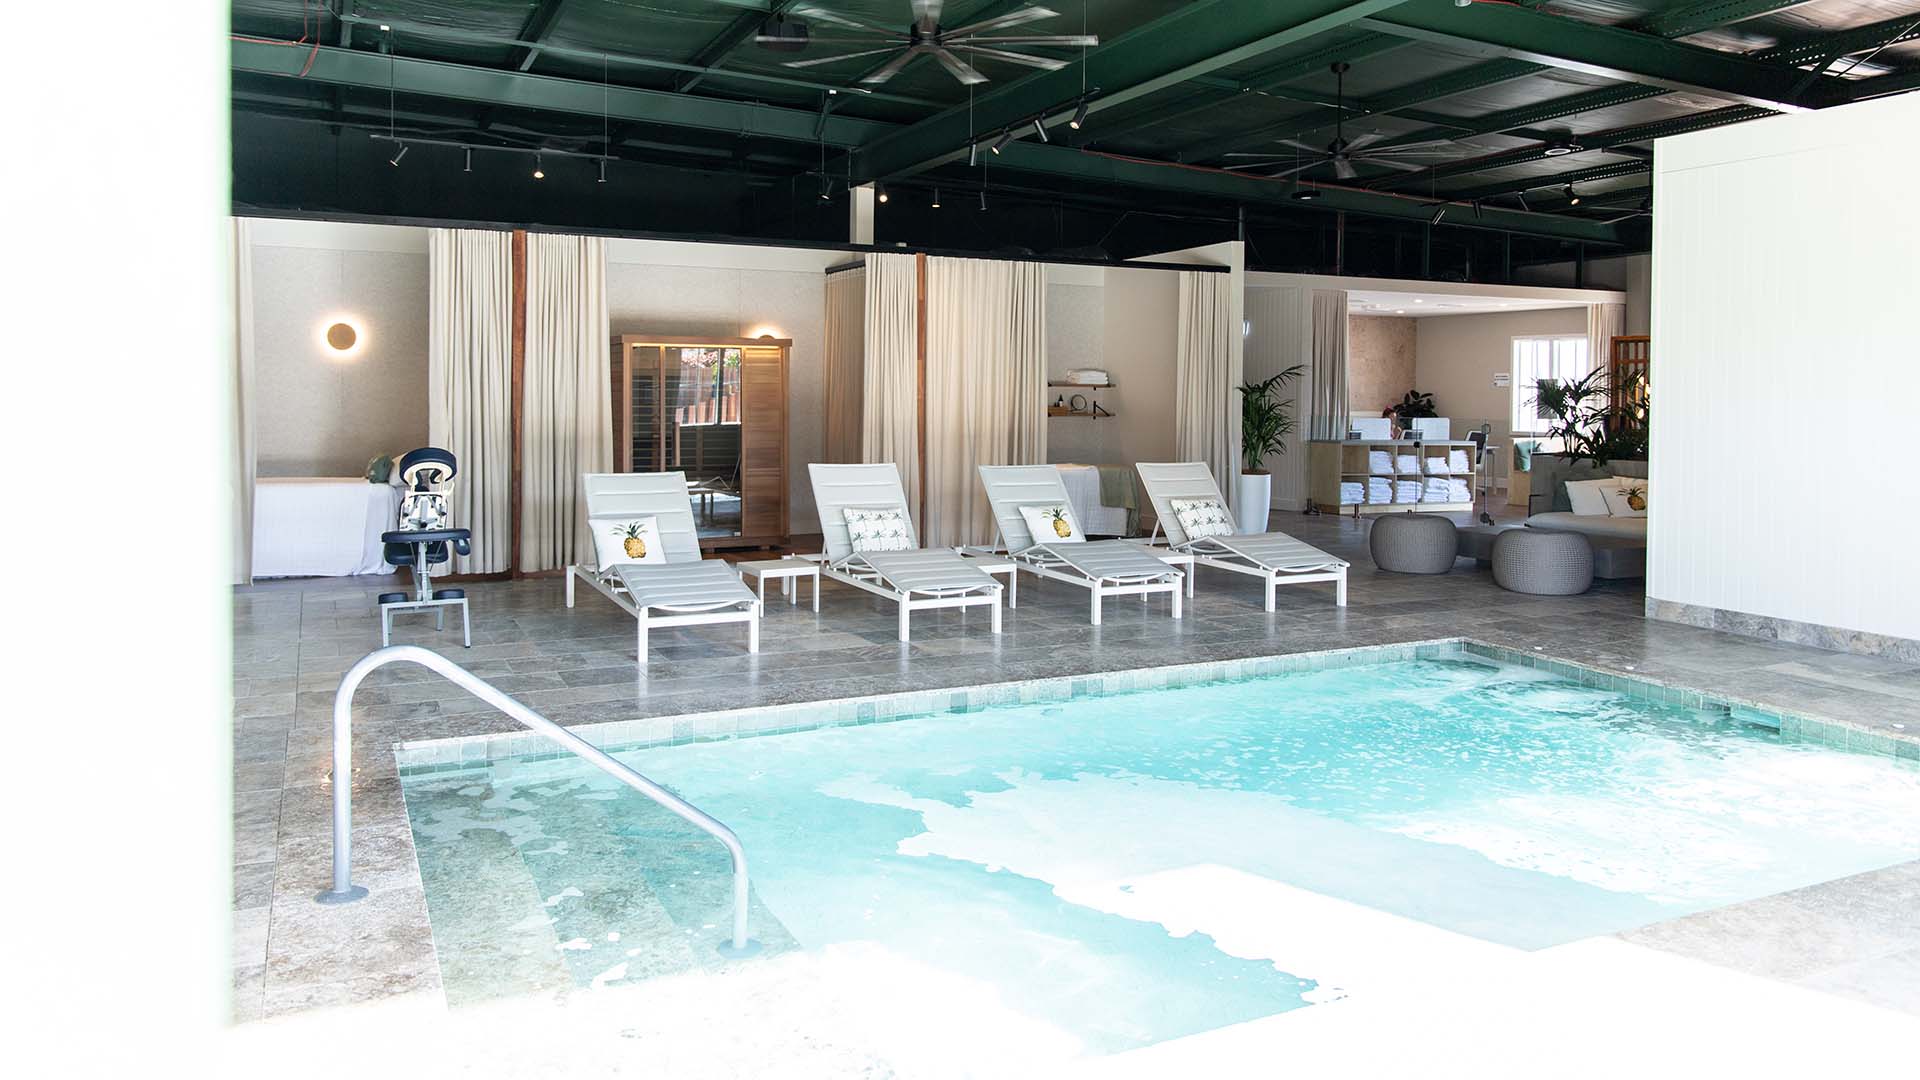 Soak's New Rooftop Bathhouse Is Bringing Steamy Dips and Sky-High Sundecks to West End